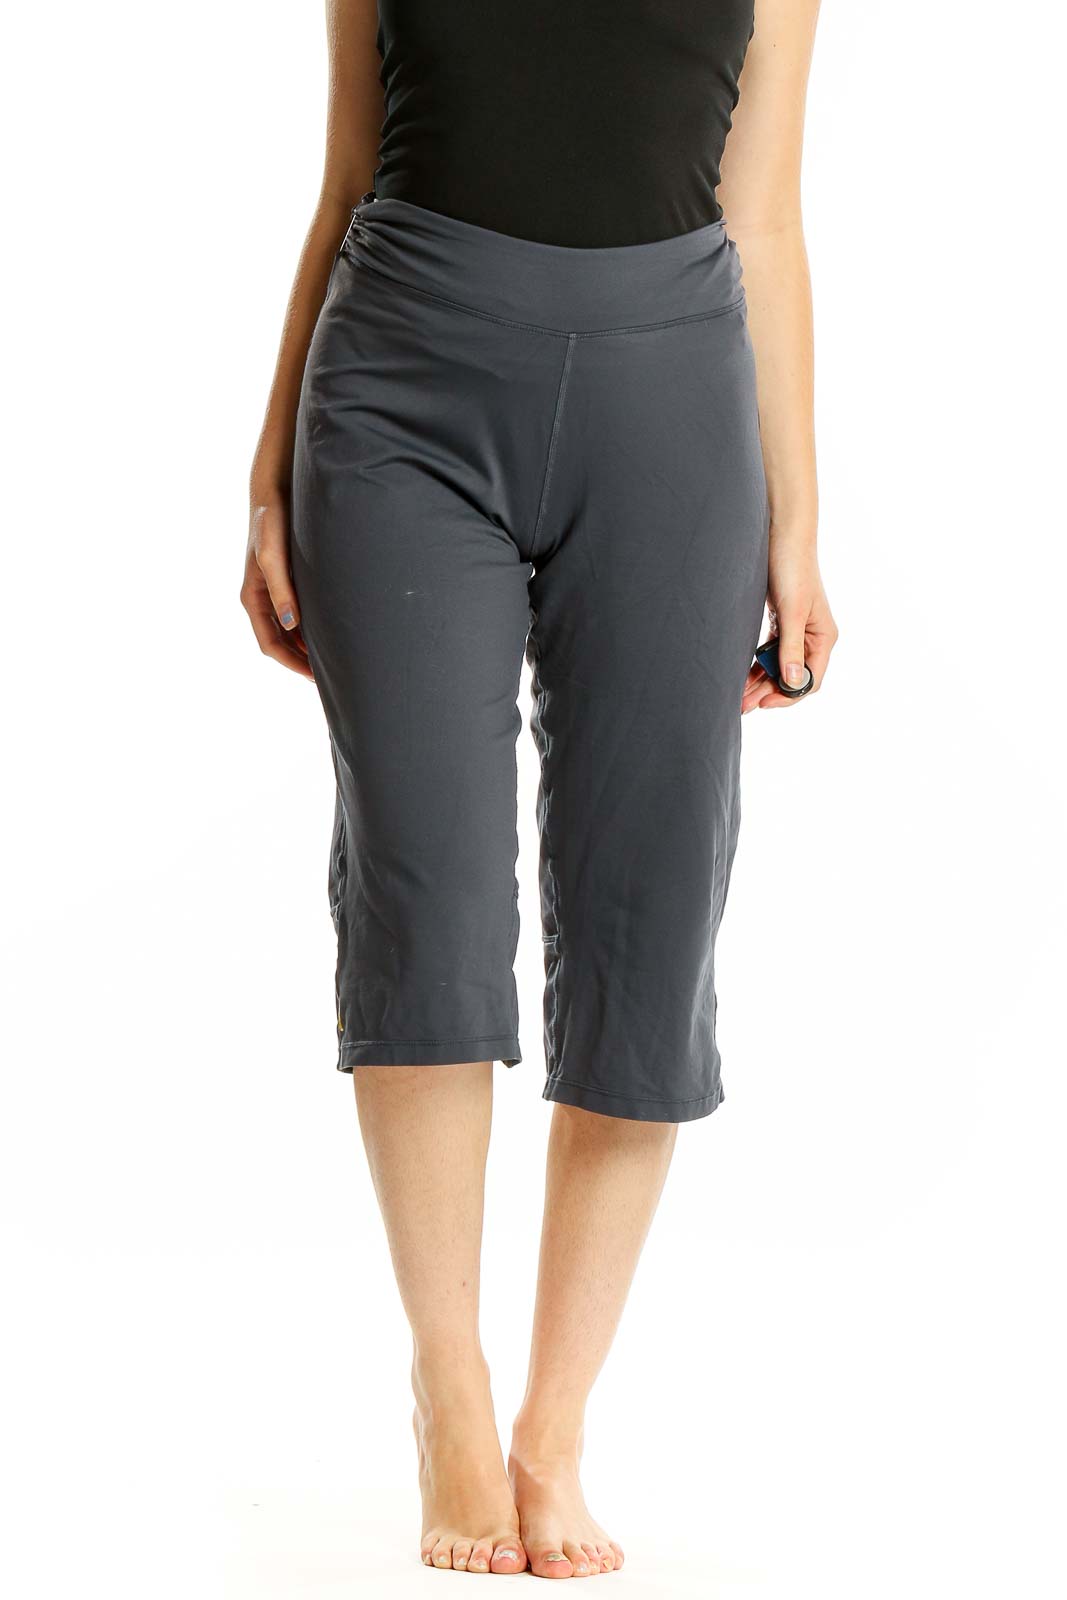 Blue Grey Cropped Activewear Pants Front